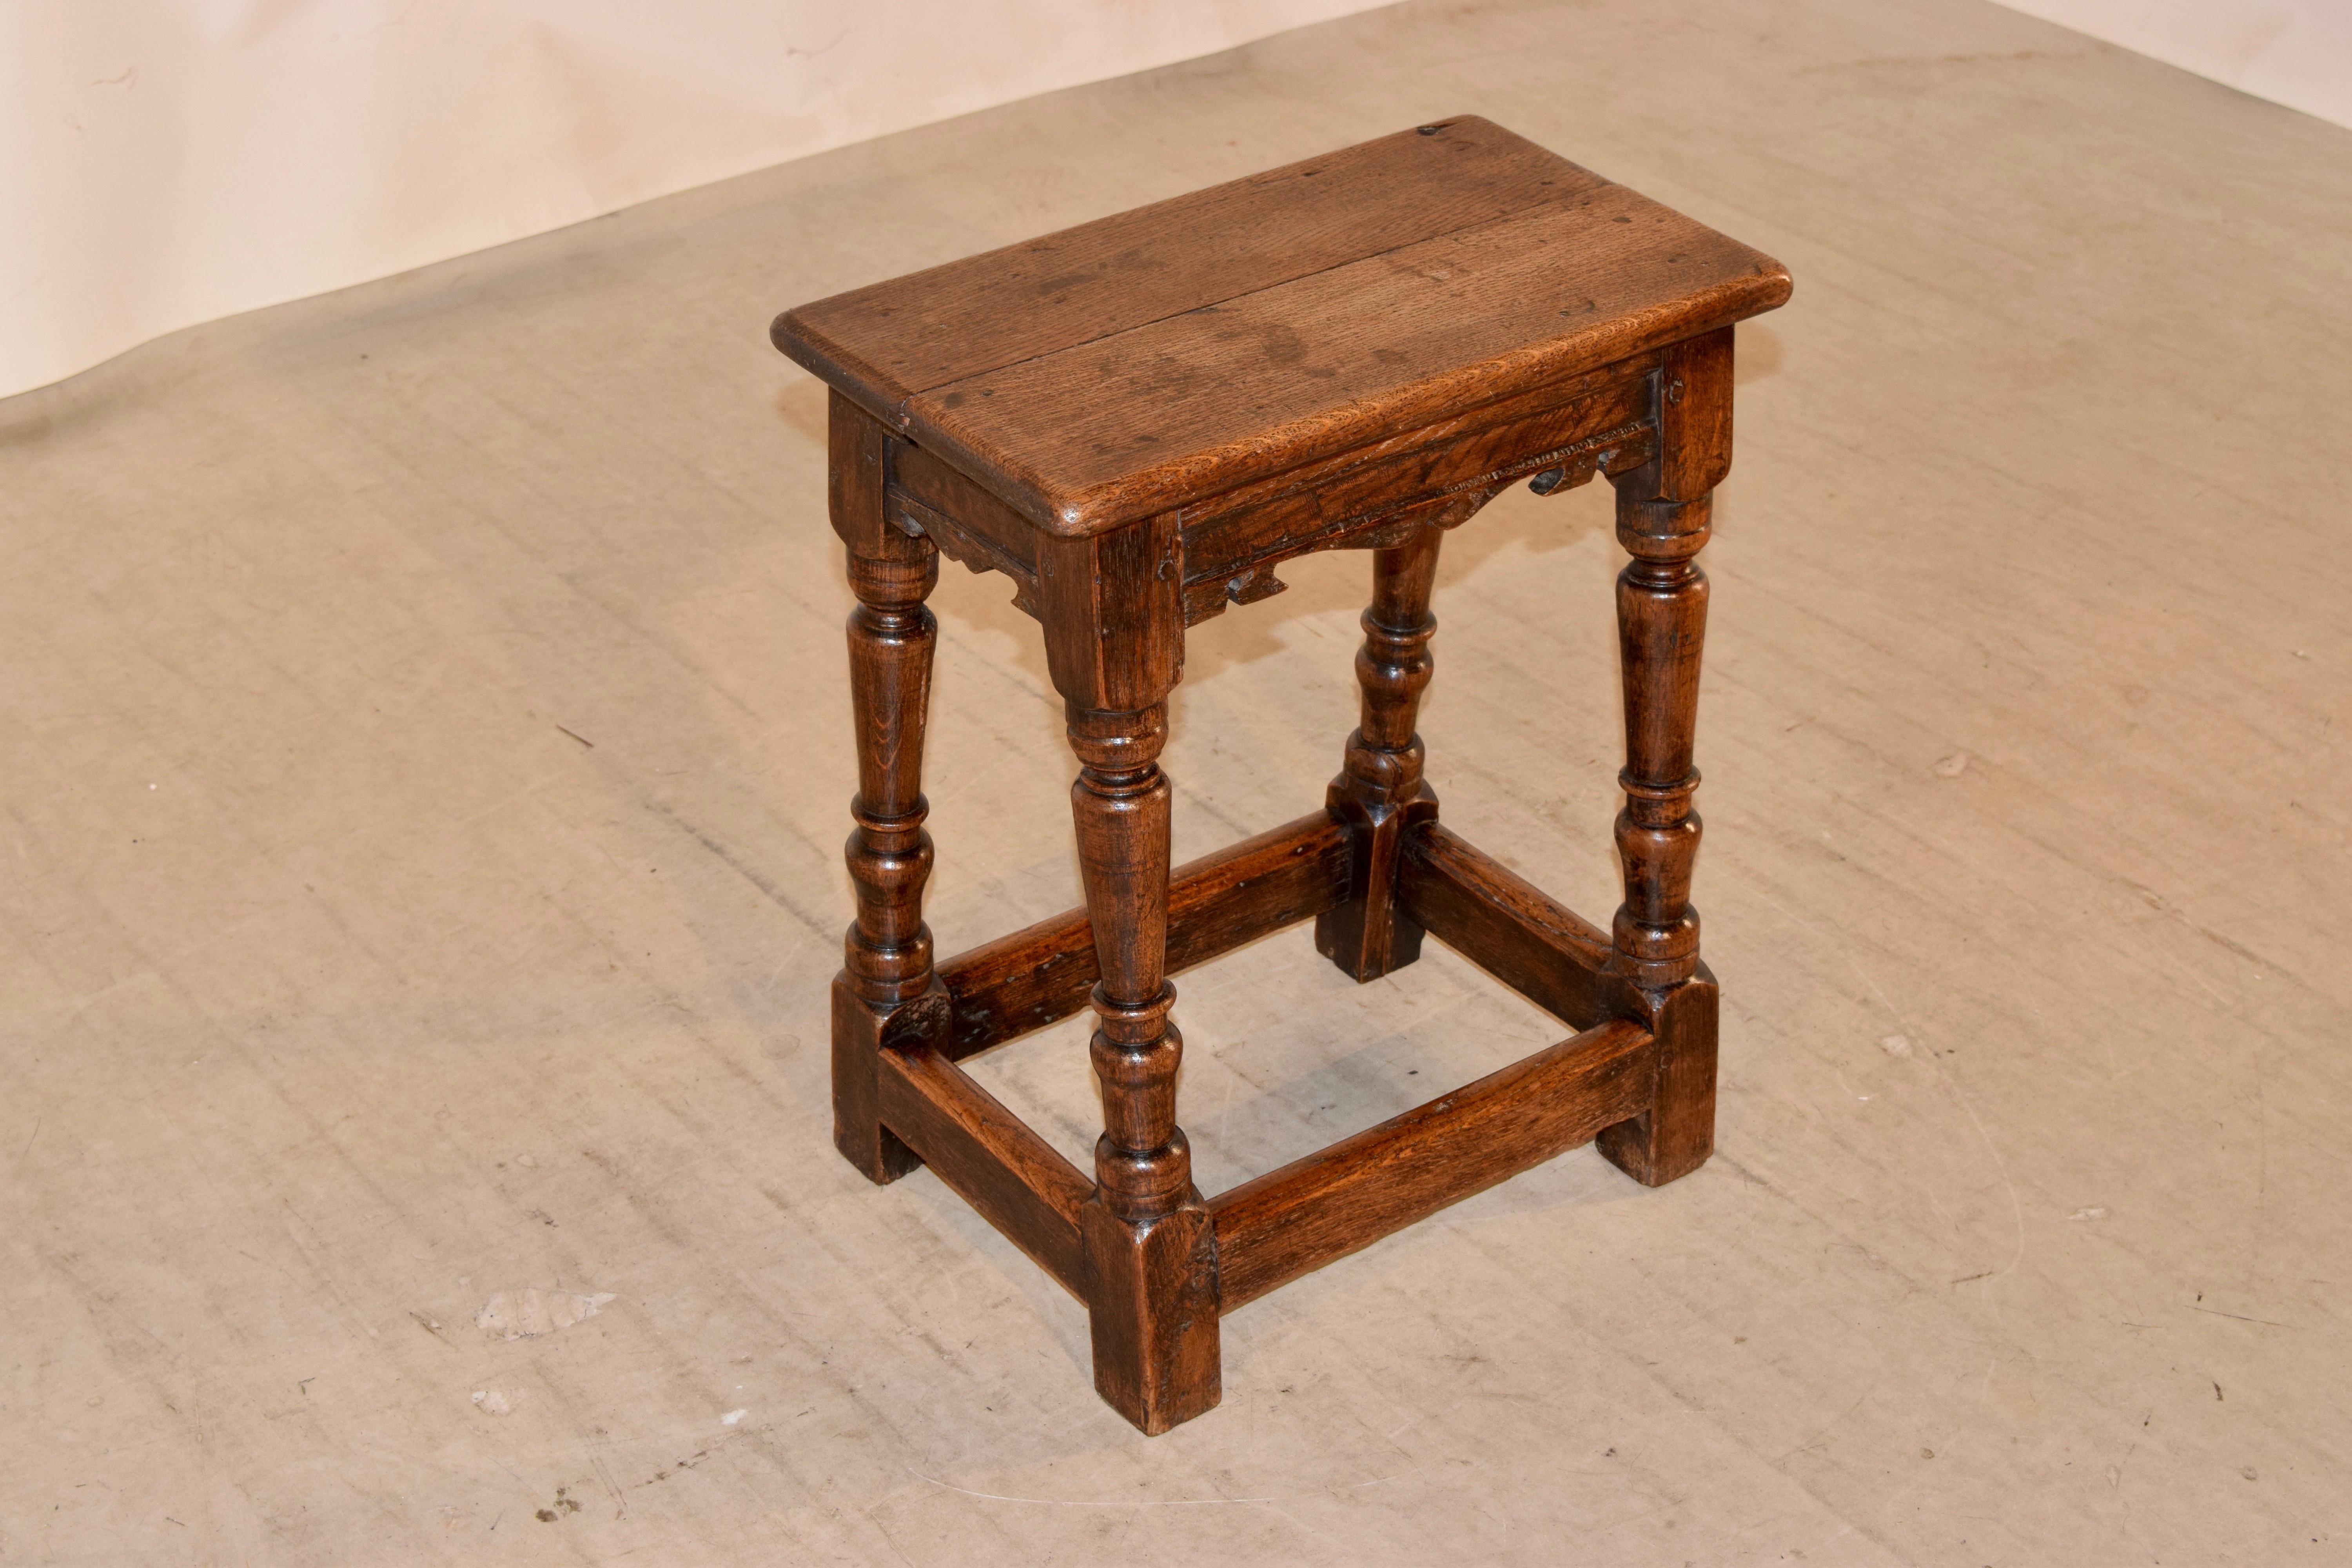 18th century oak joint stool from England with a two board top with rounded edges following down to a lovely hand scalloped apron and supported on splayed and hand turned legs, joined by simple stretchers.